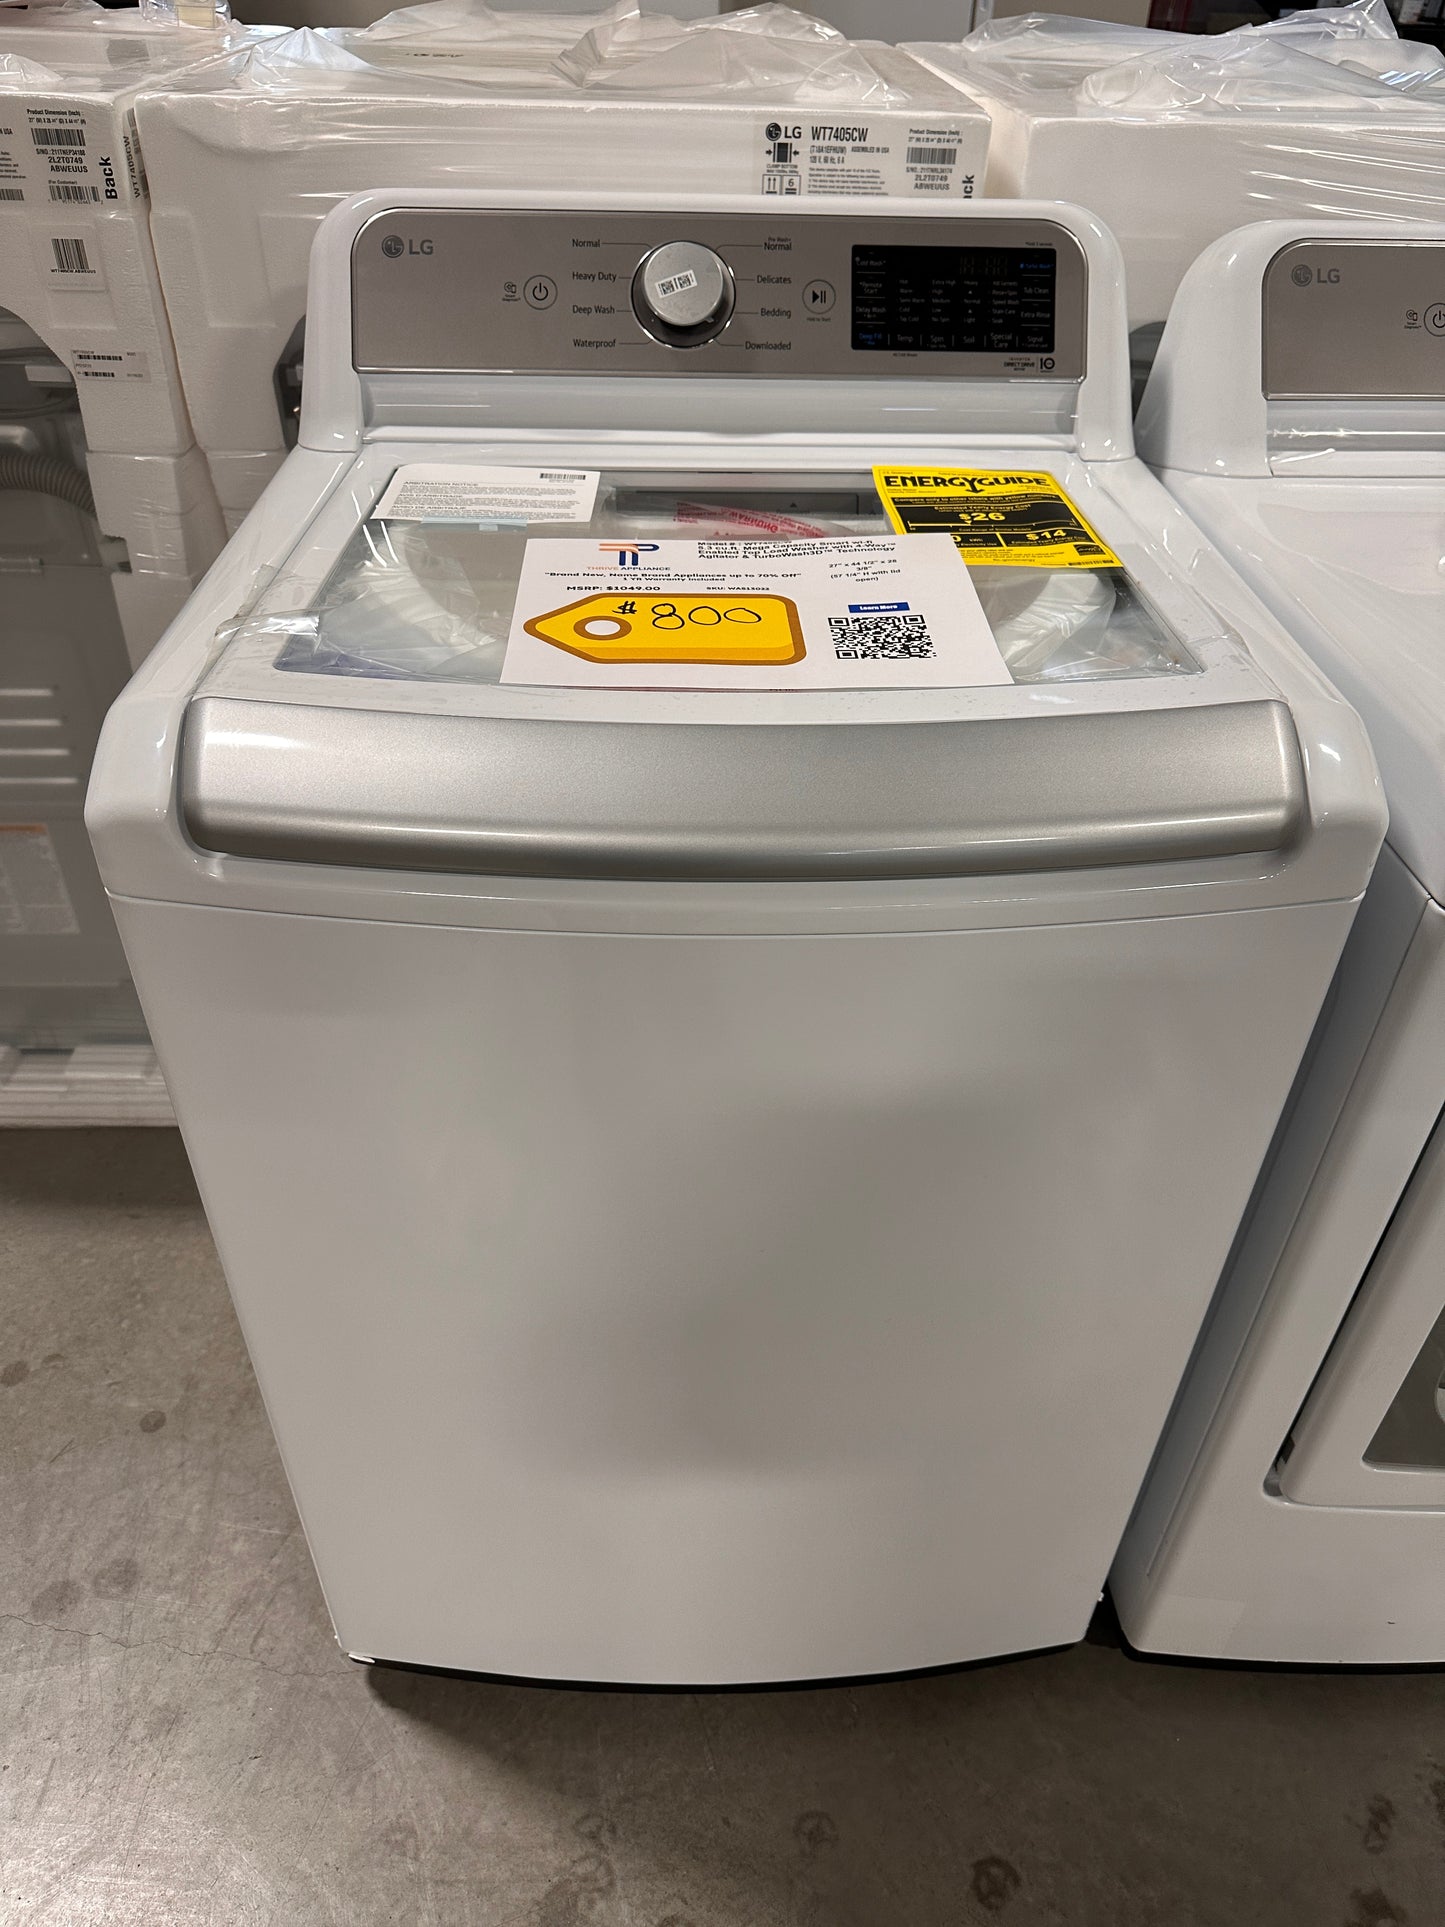 GREAT NEW TOP LOAD WASHER with 4-WAY AGITATOR - WAS13022 WT7405CW